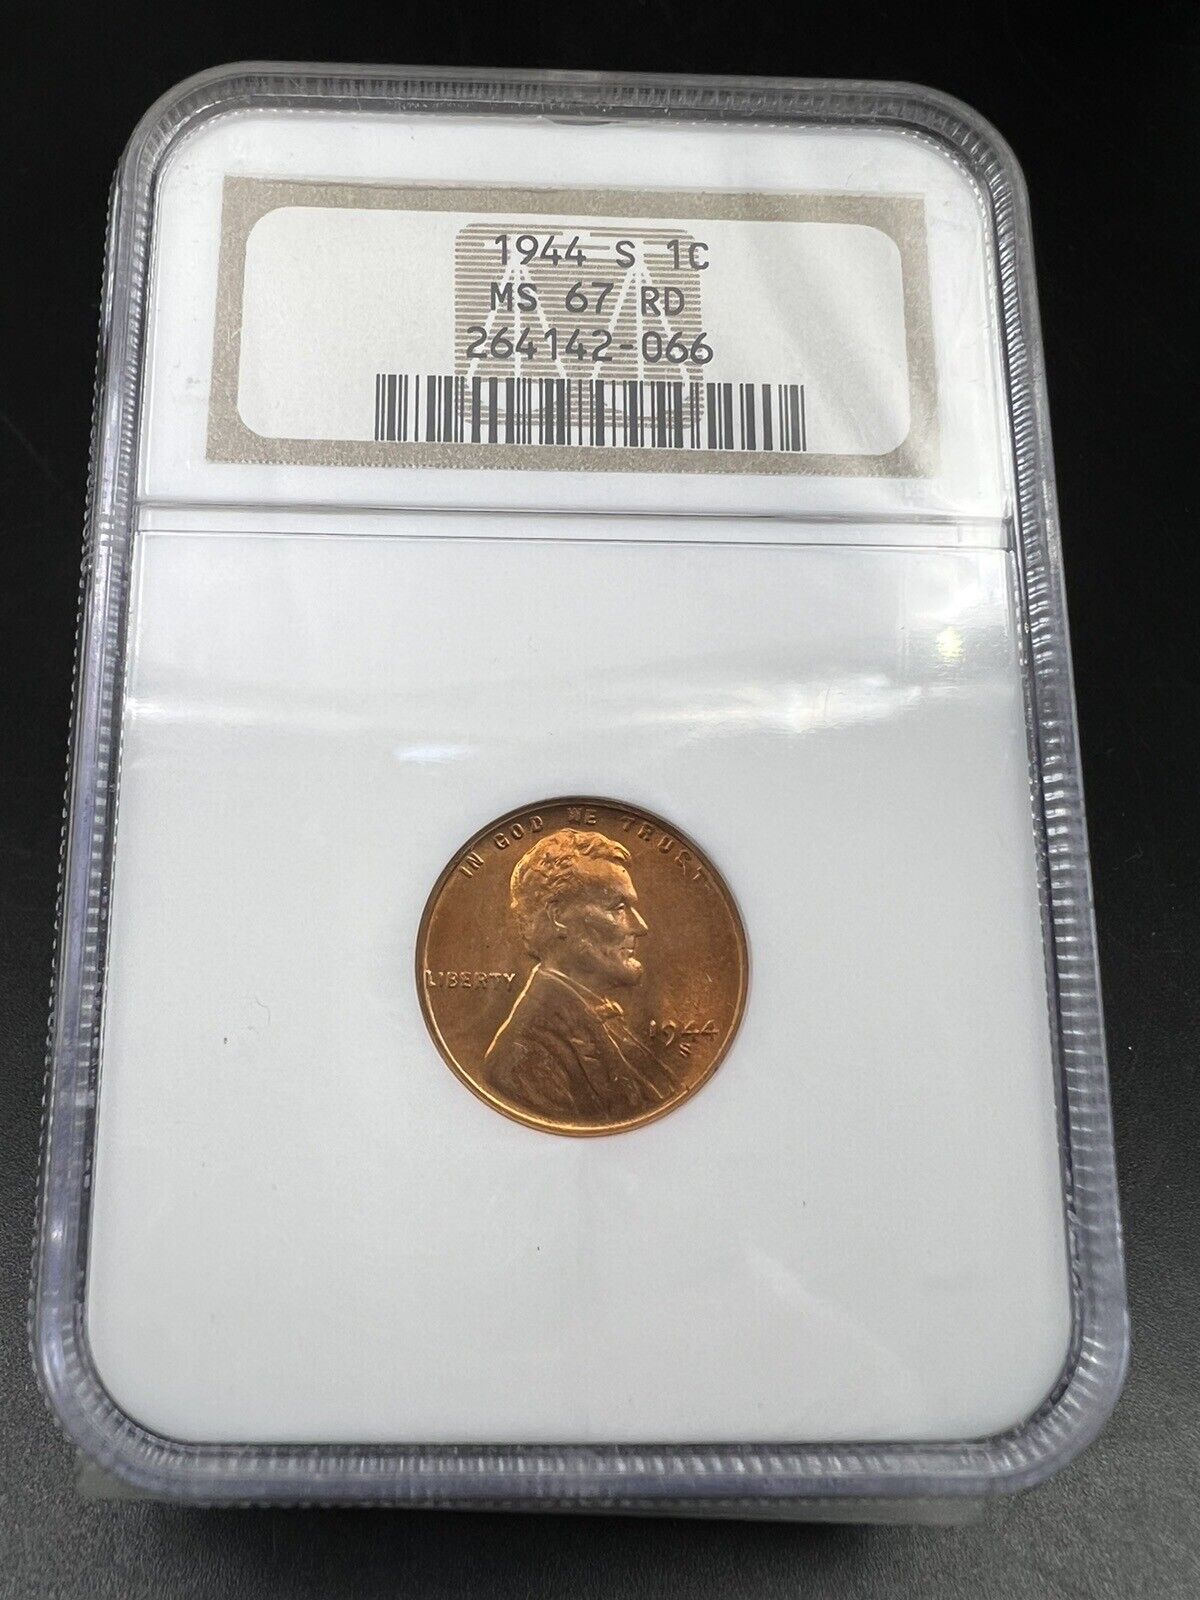 1944 S 1c Lincoln Wheat Cent Penny Coin NGC MS67 RD Gem BU Certified #066